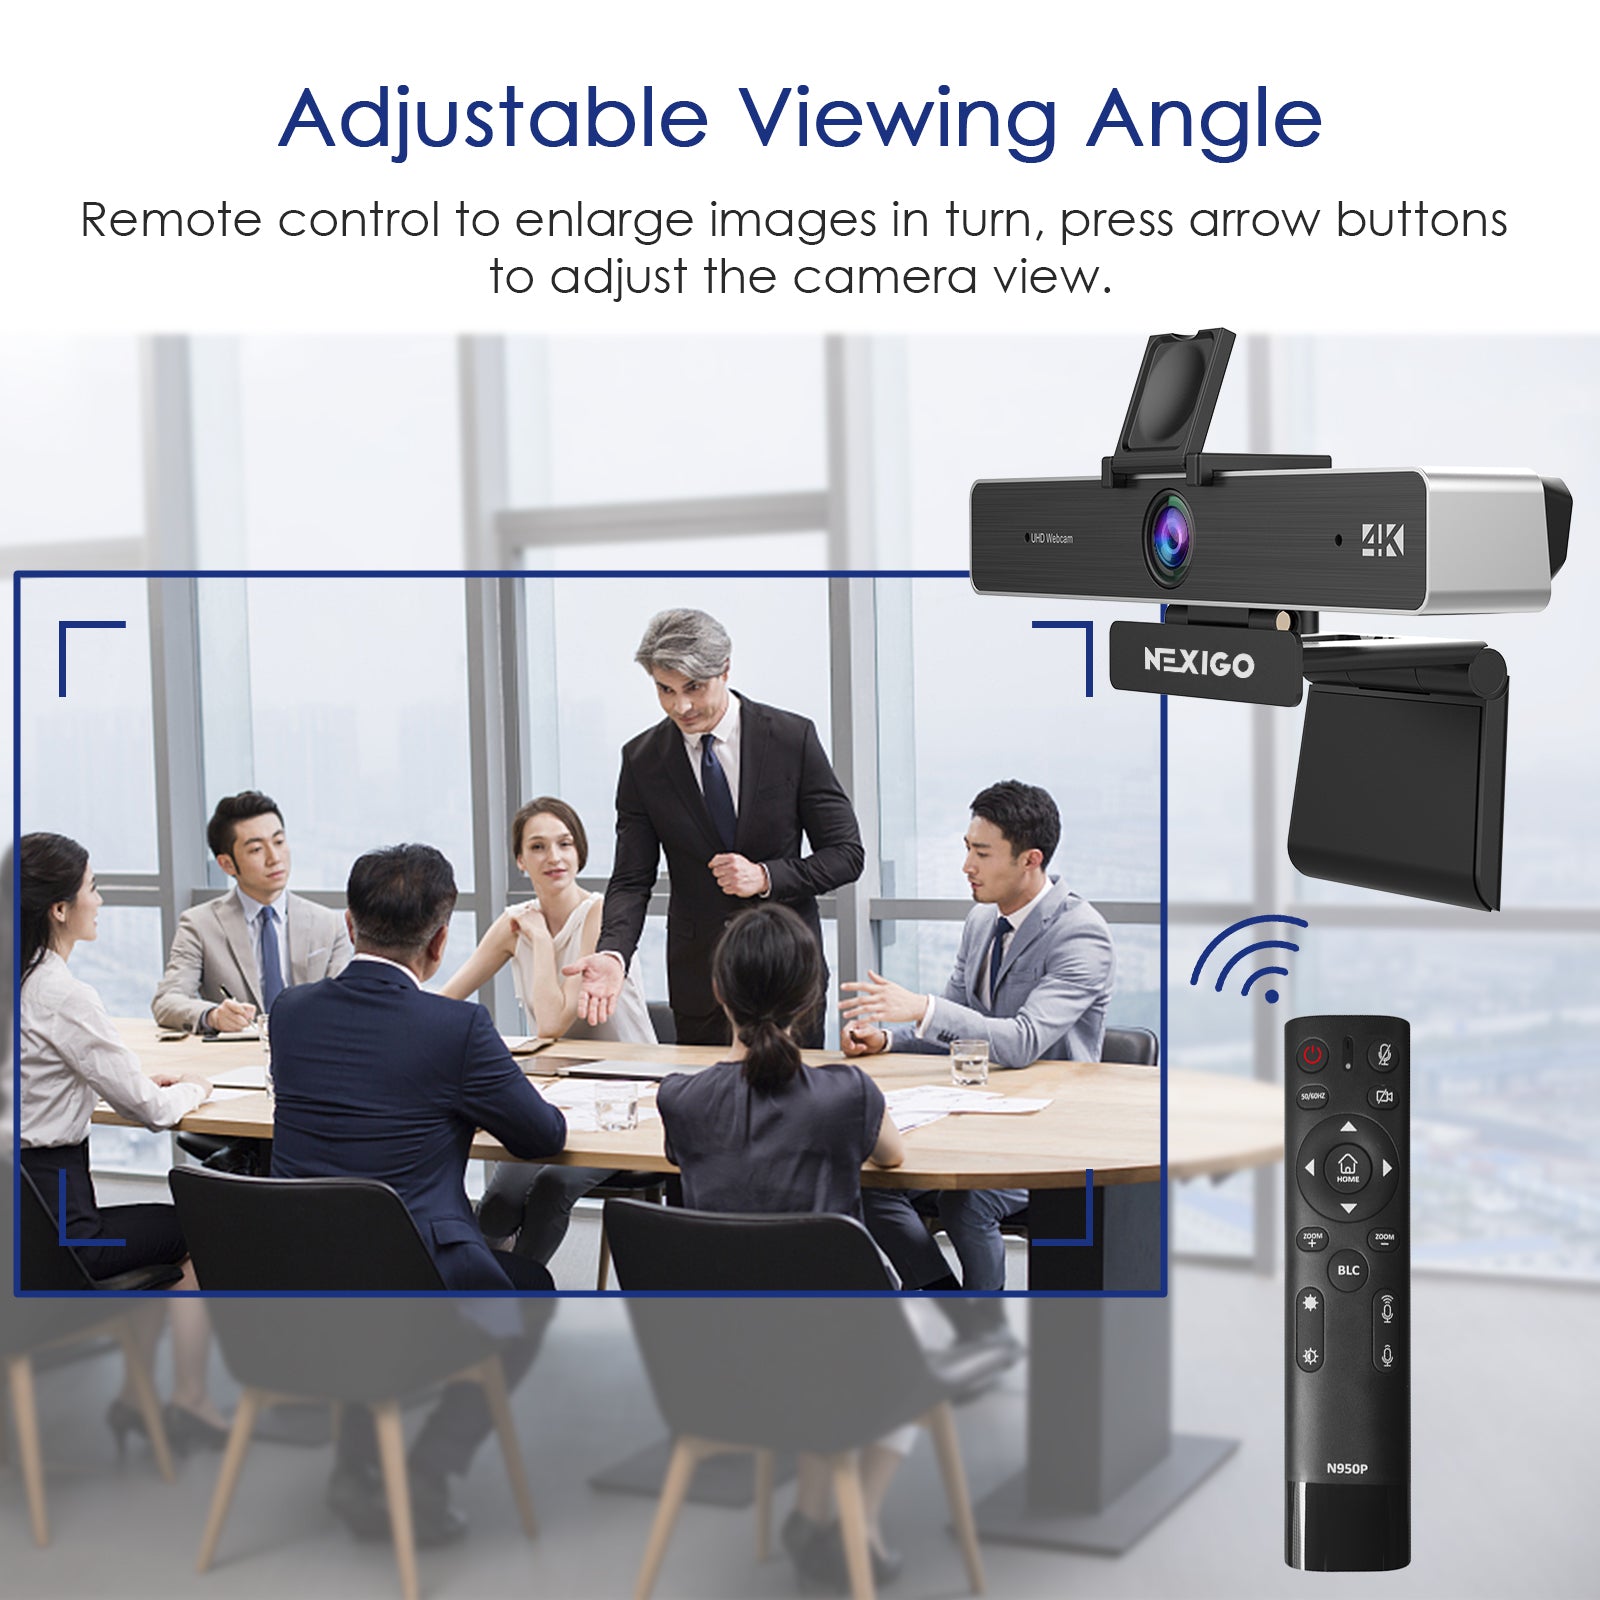 Easily adjust webcam viewing angle with remote control during meetings.